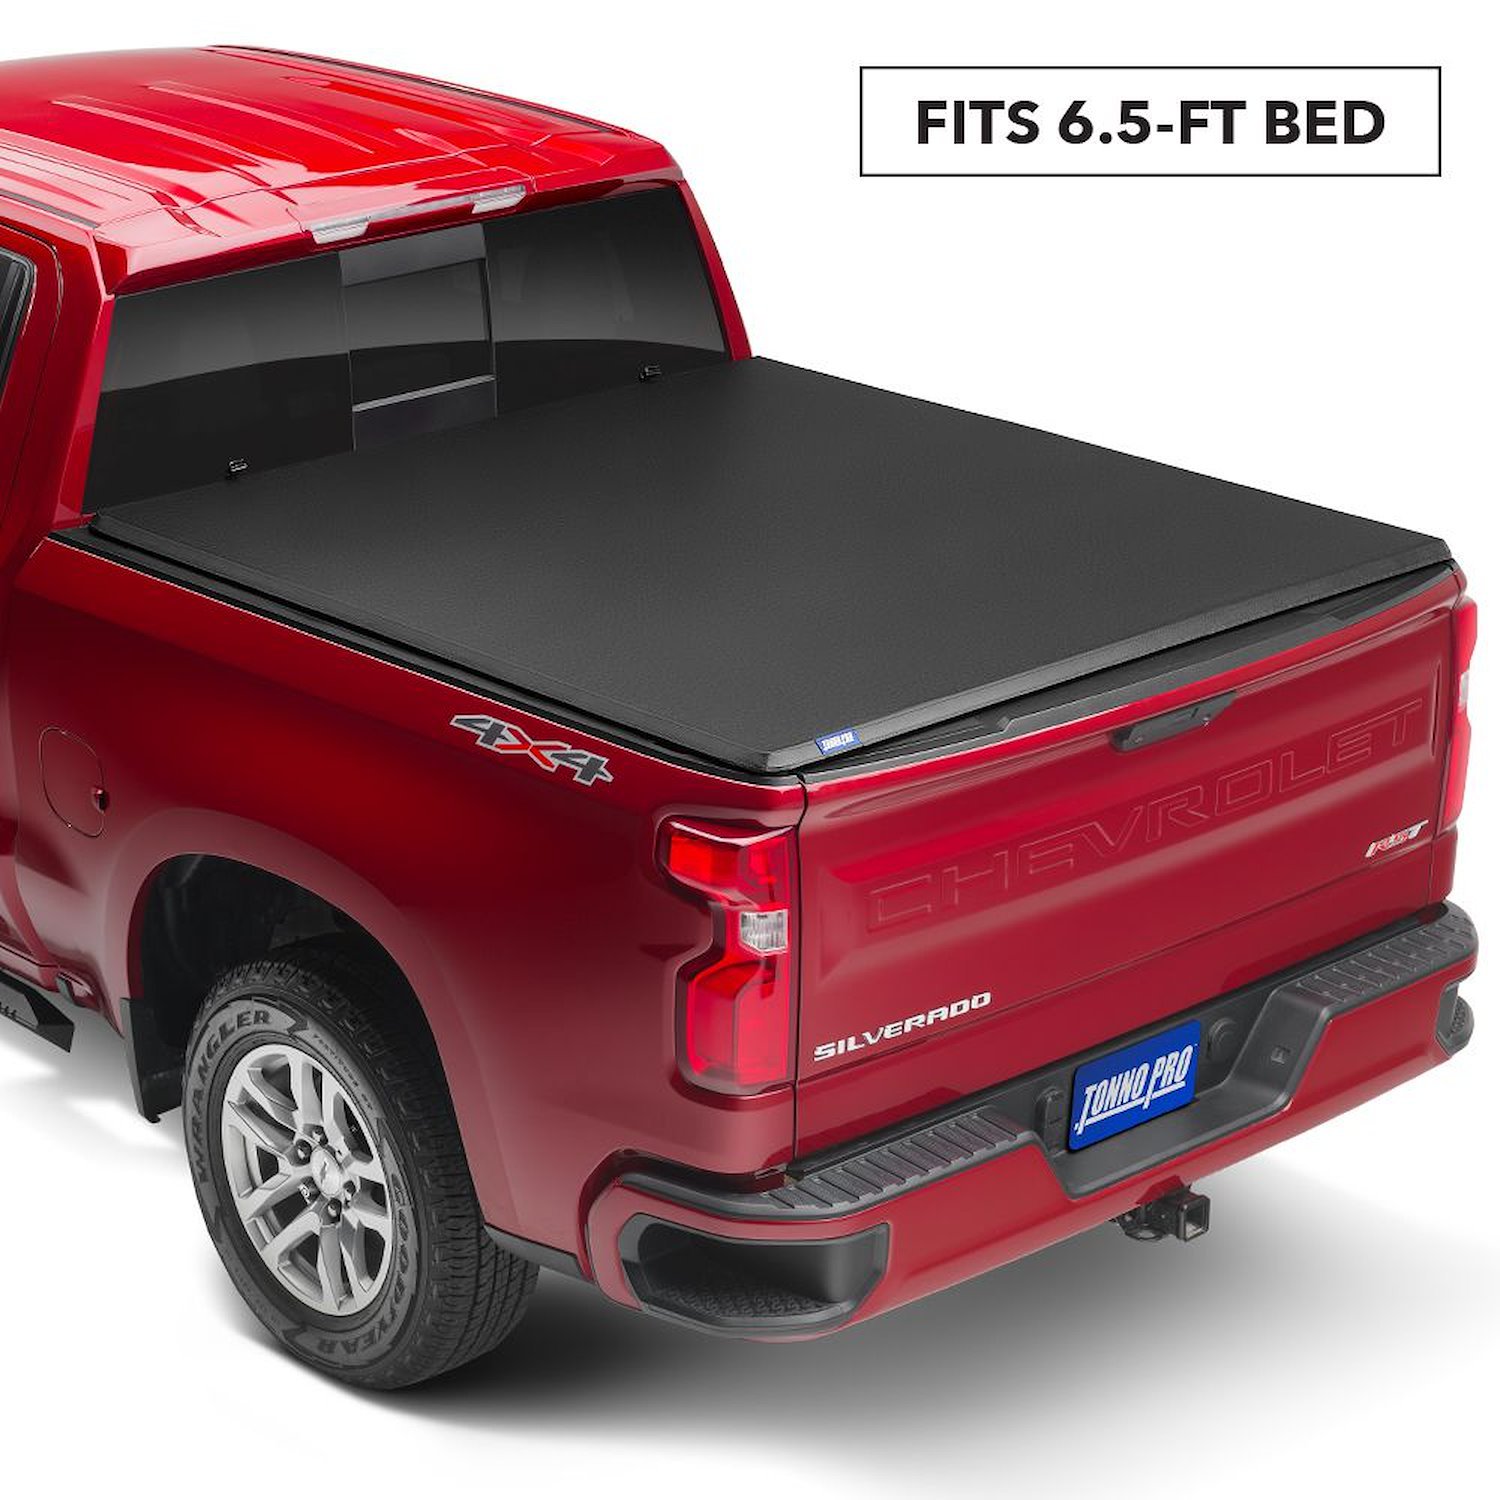 Soft Vinyl Trifold Tonneau Cover 1997-2003 Ford F-150 & 2004 Heritage Model